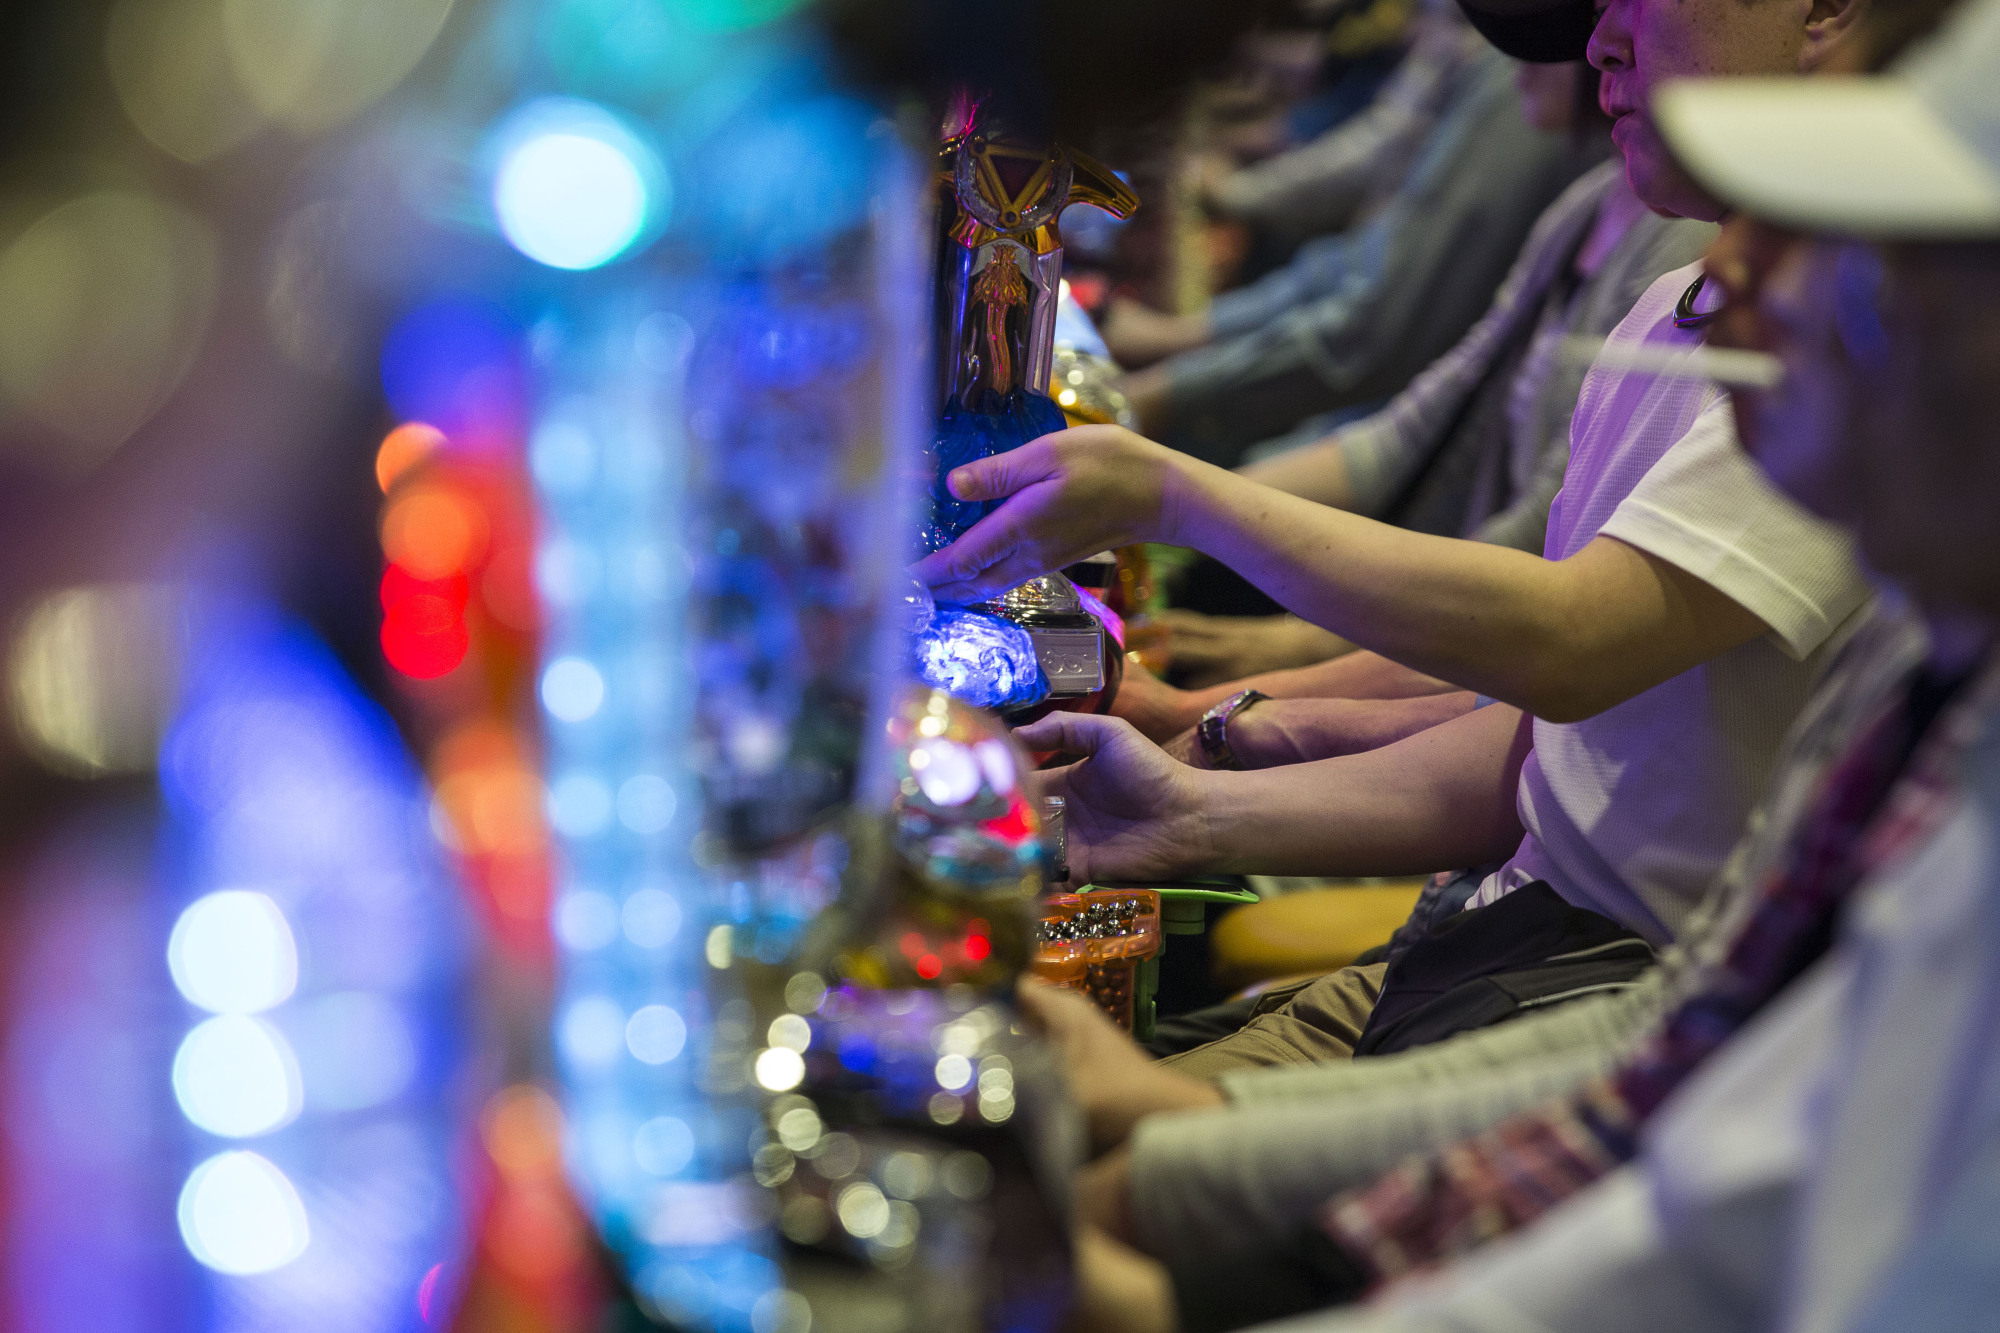 Pachinko players in Japan spend an average of &#165;58,000 per month on the activity. | BLOOMBERG